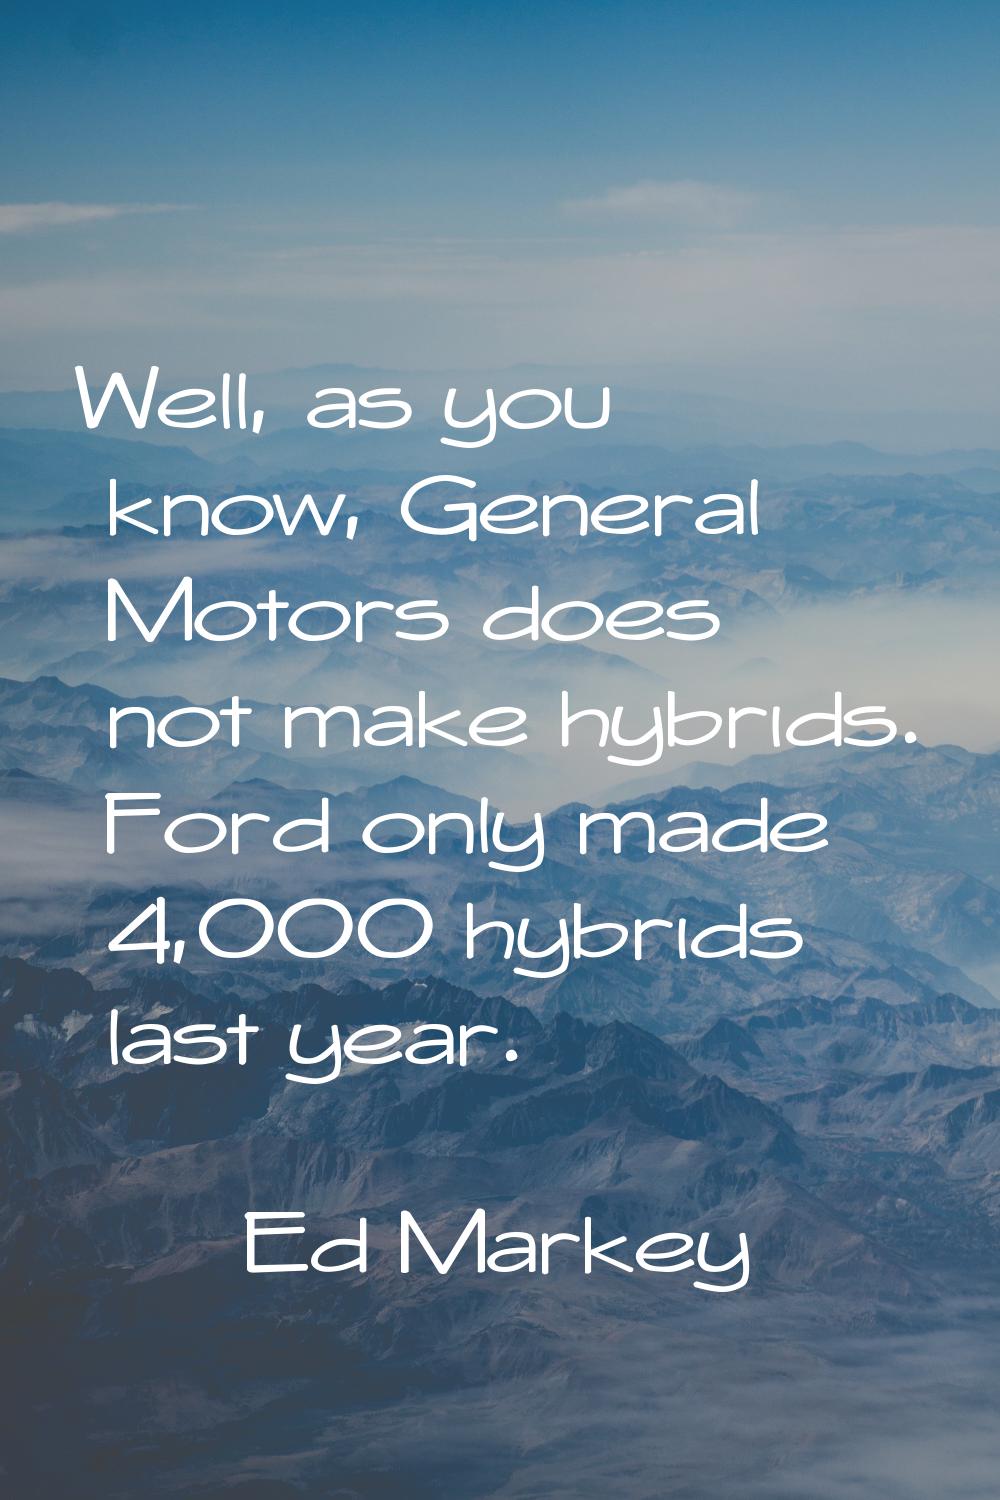 Well, as you know, General Motors does not make hybrids. Ford only made 4,000 hybrids last year.